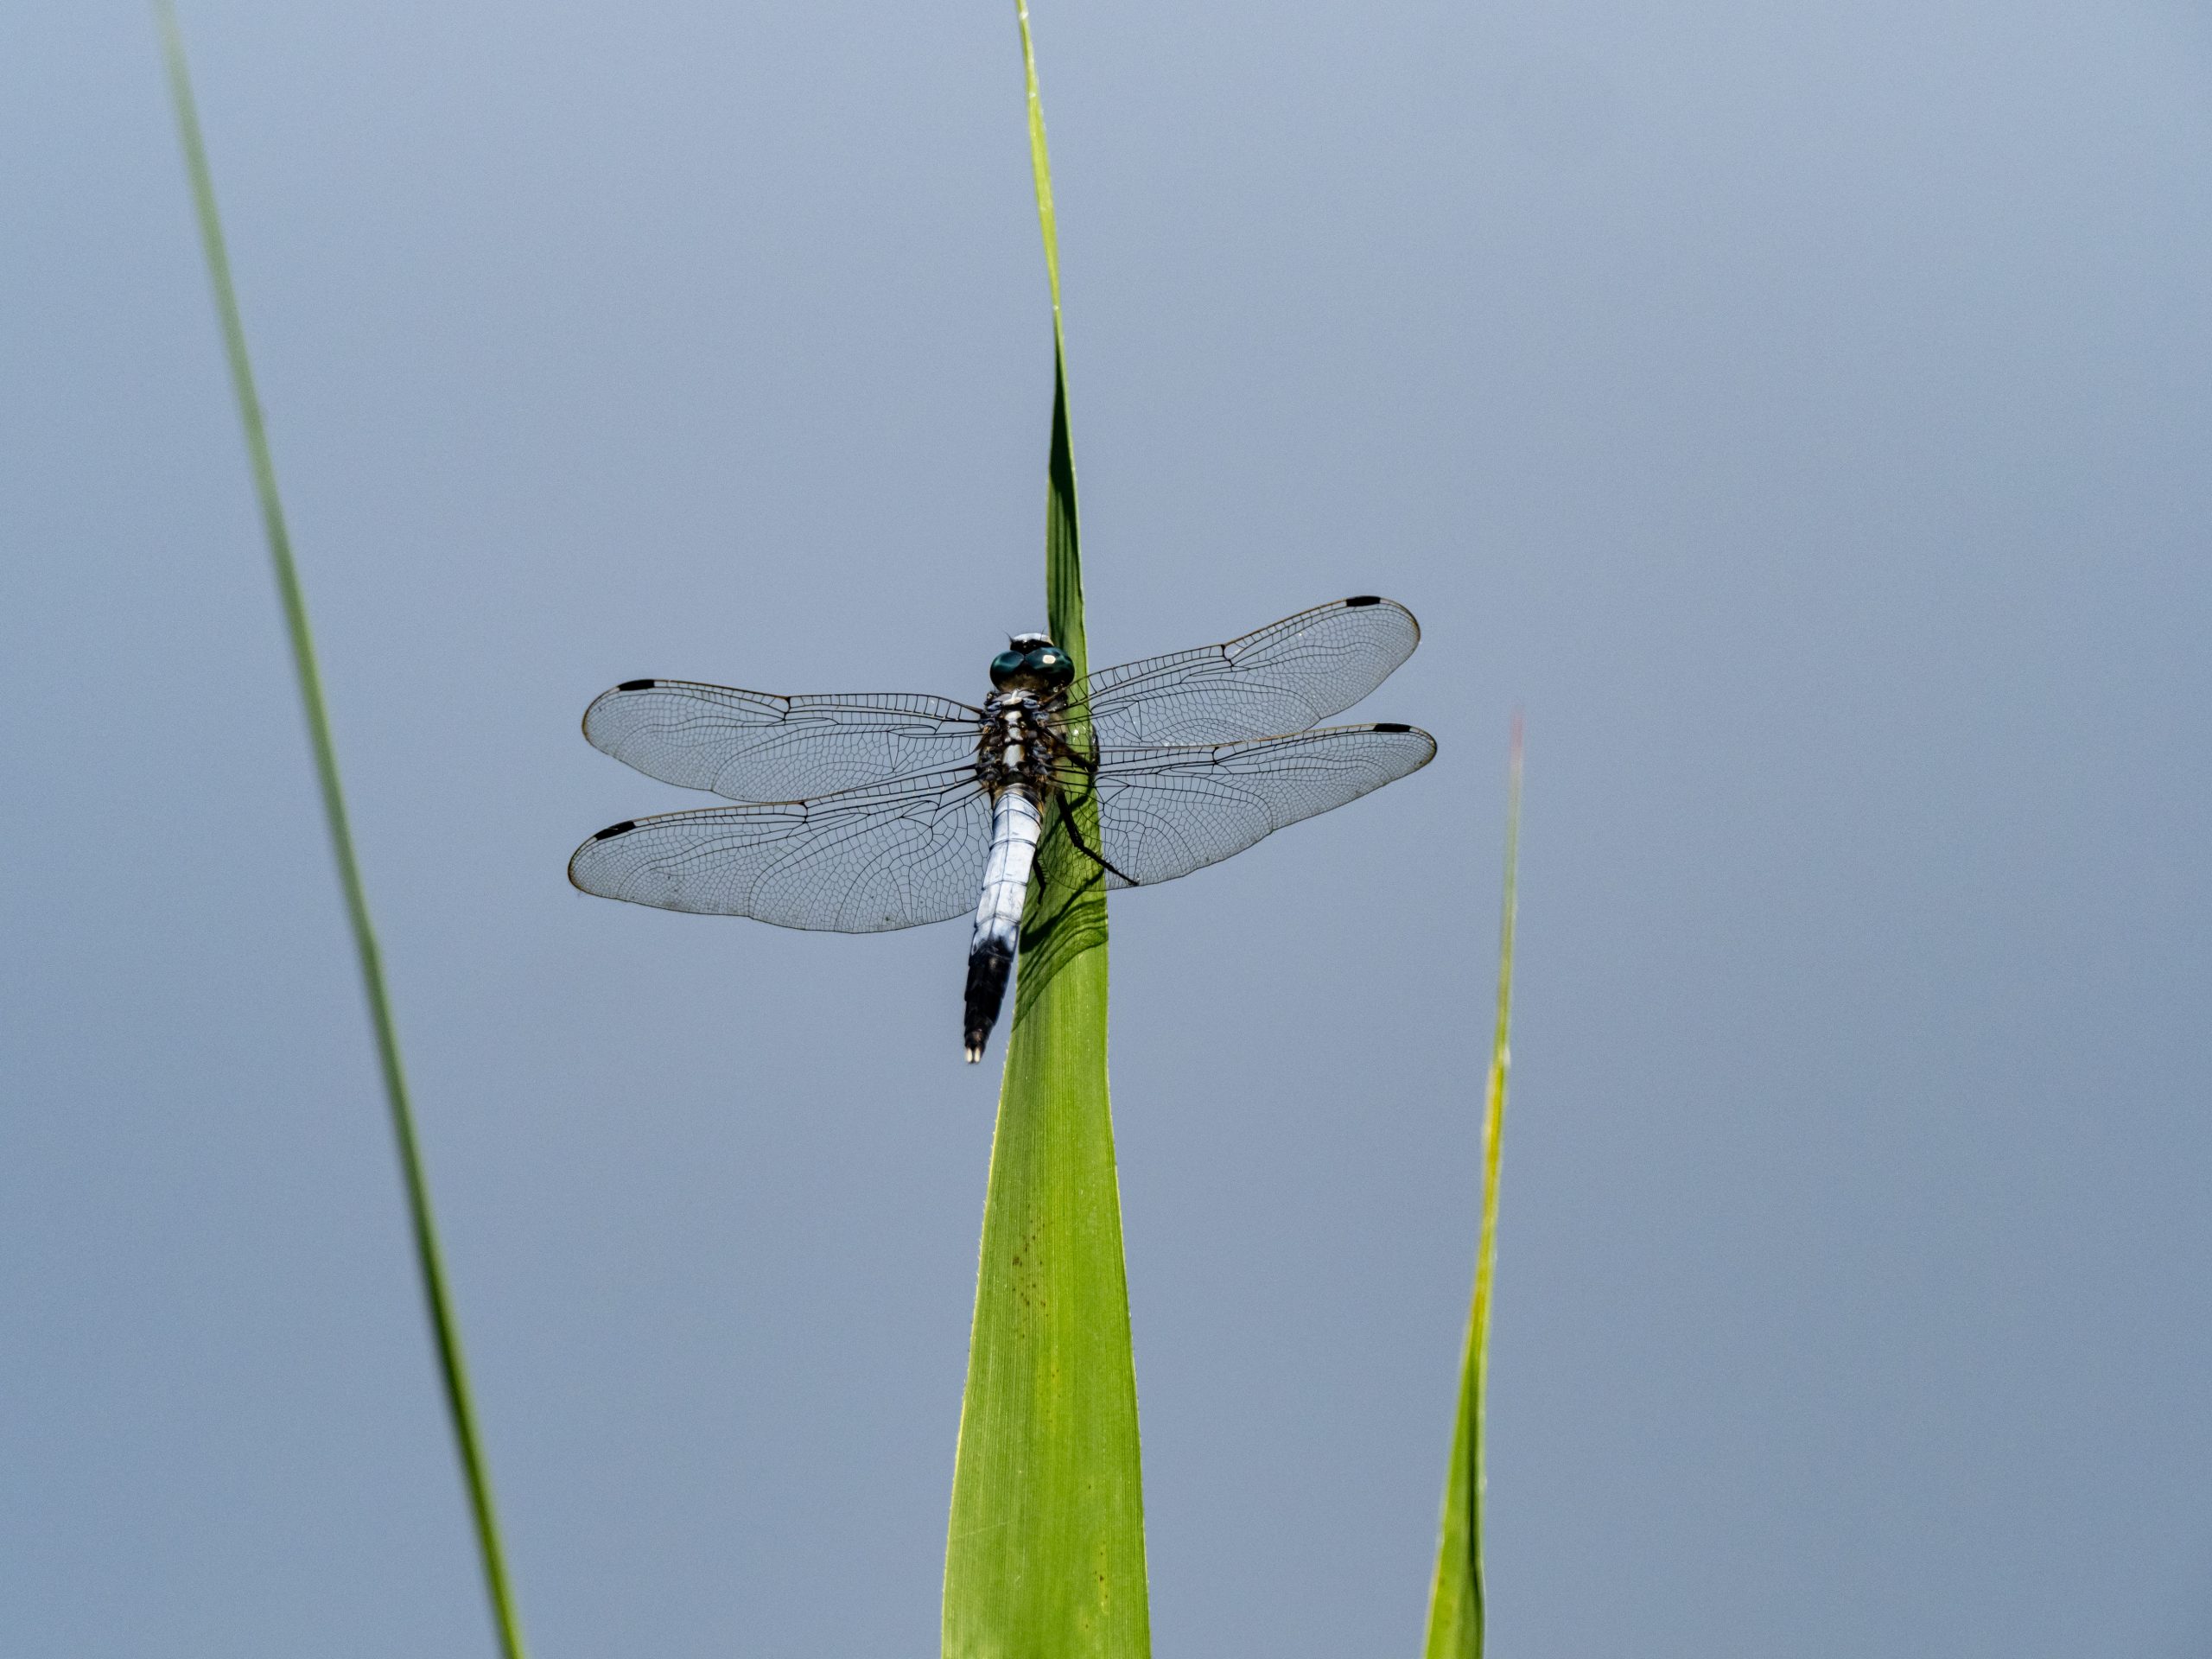 Male Dragonflies Grow Wax Coats to Adapt to Warming Climate - Image